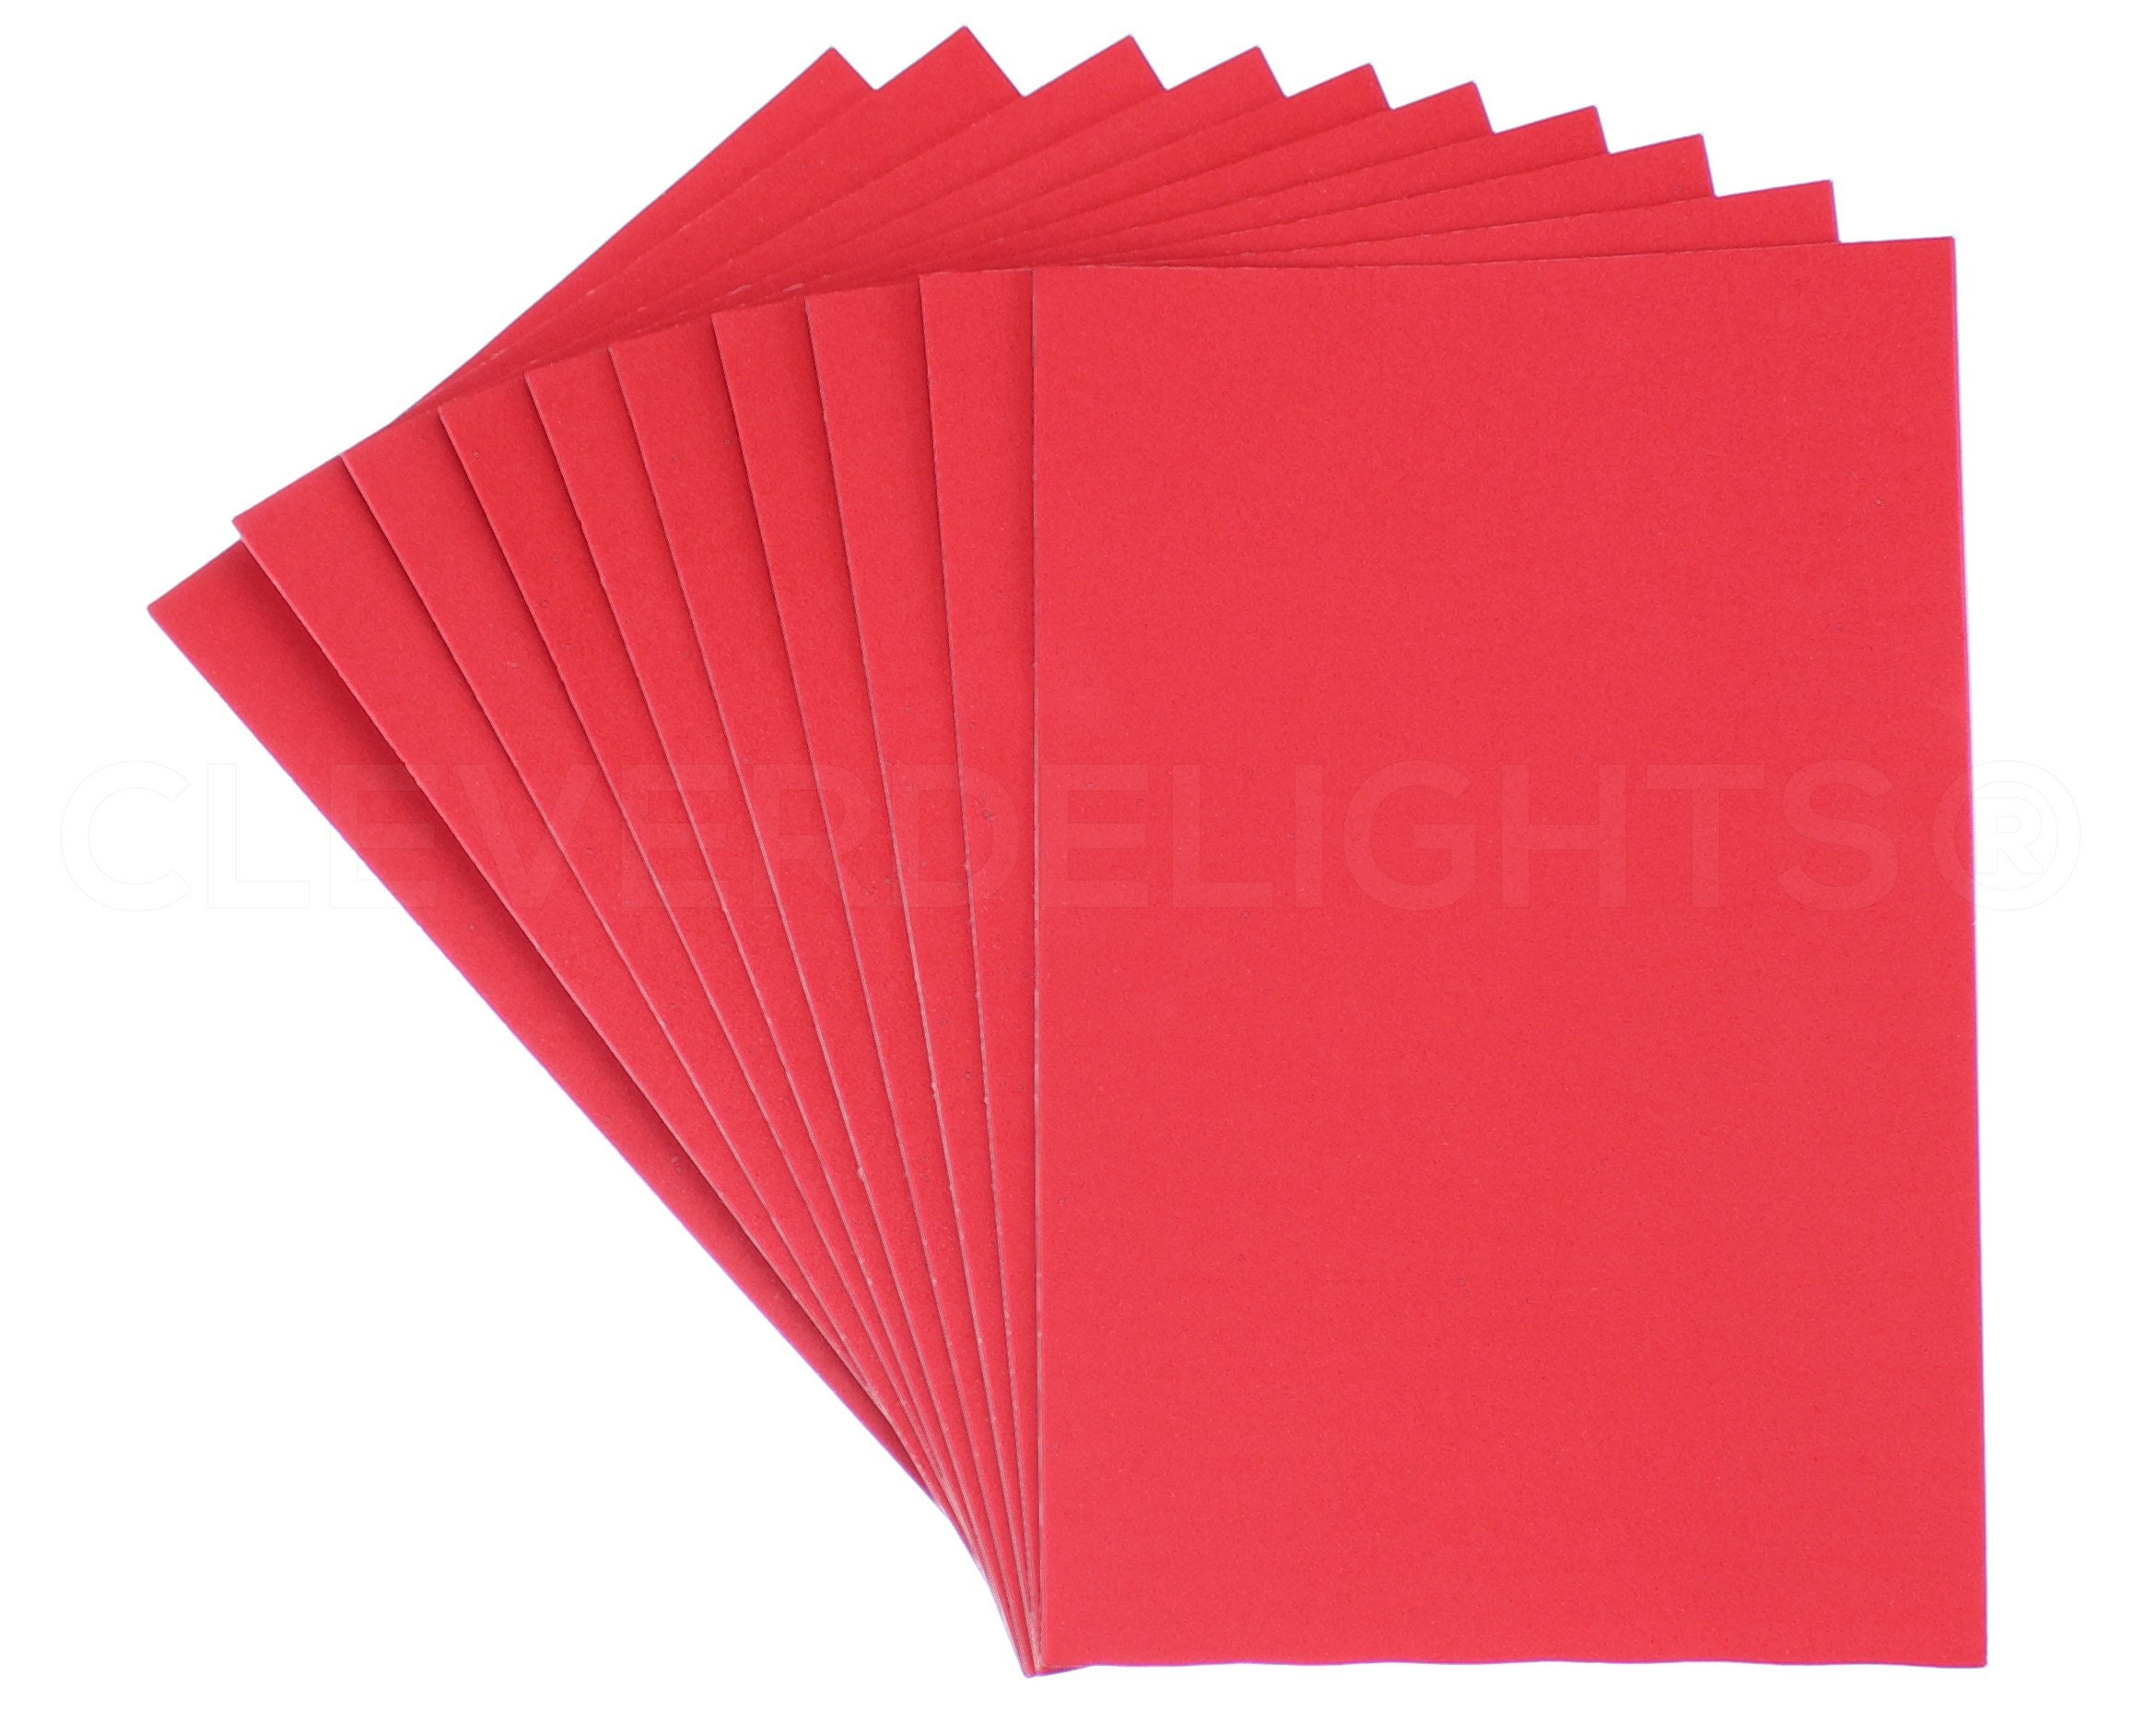 Buy InArt 5 Pcs 20x20x1 inch EPE Foam Sheet (Pack of 5), INA-727 Online At  Best Price On Moglix